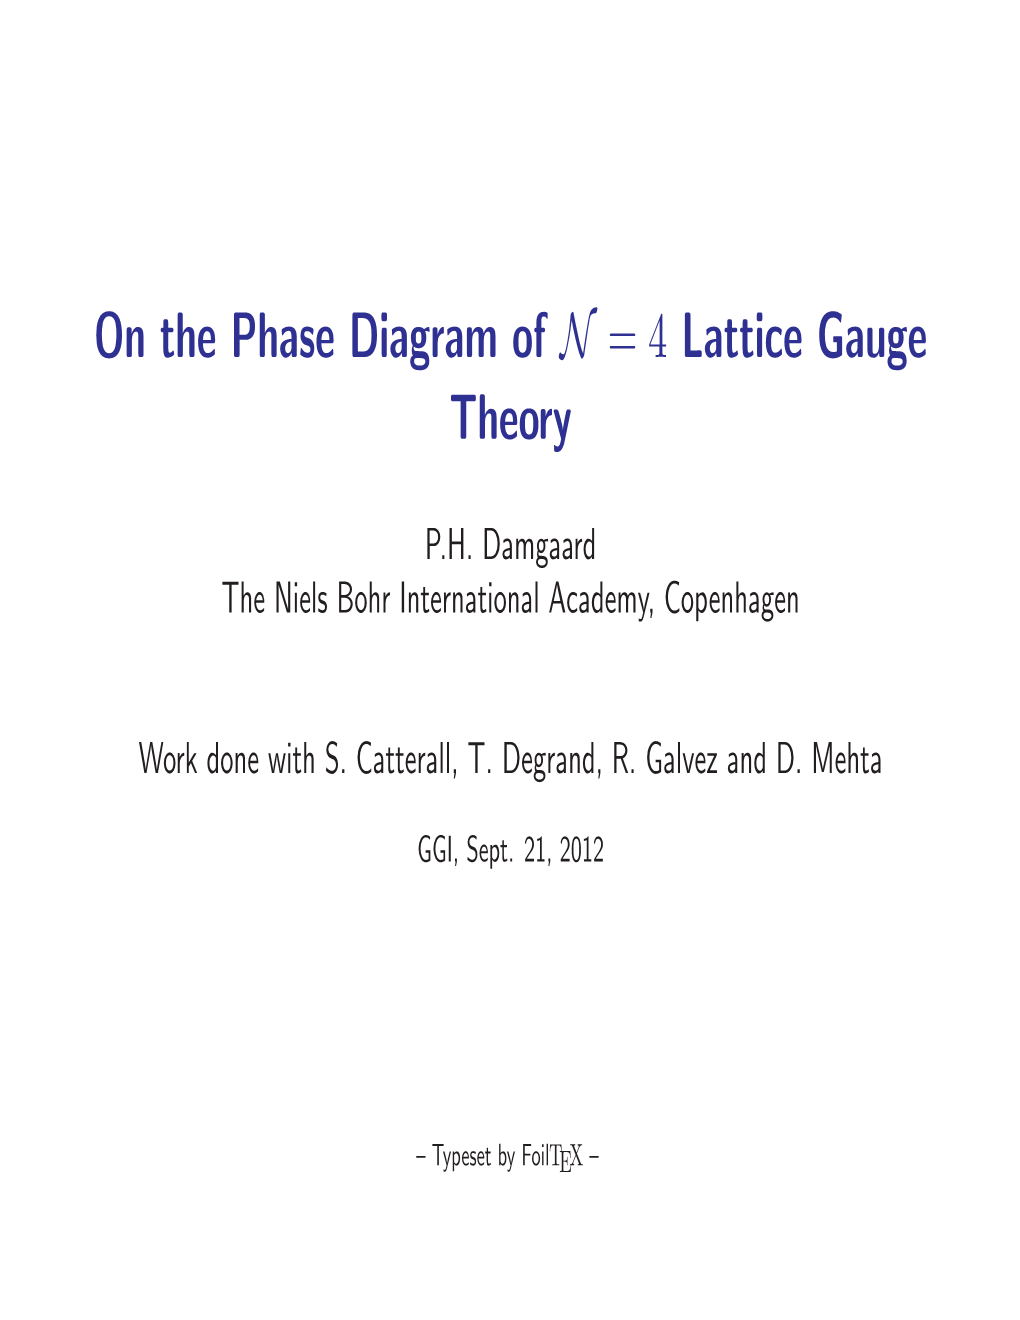 On the Phase Diagram of N = 4 Lattice Gauge Theory